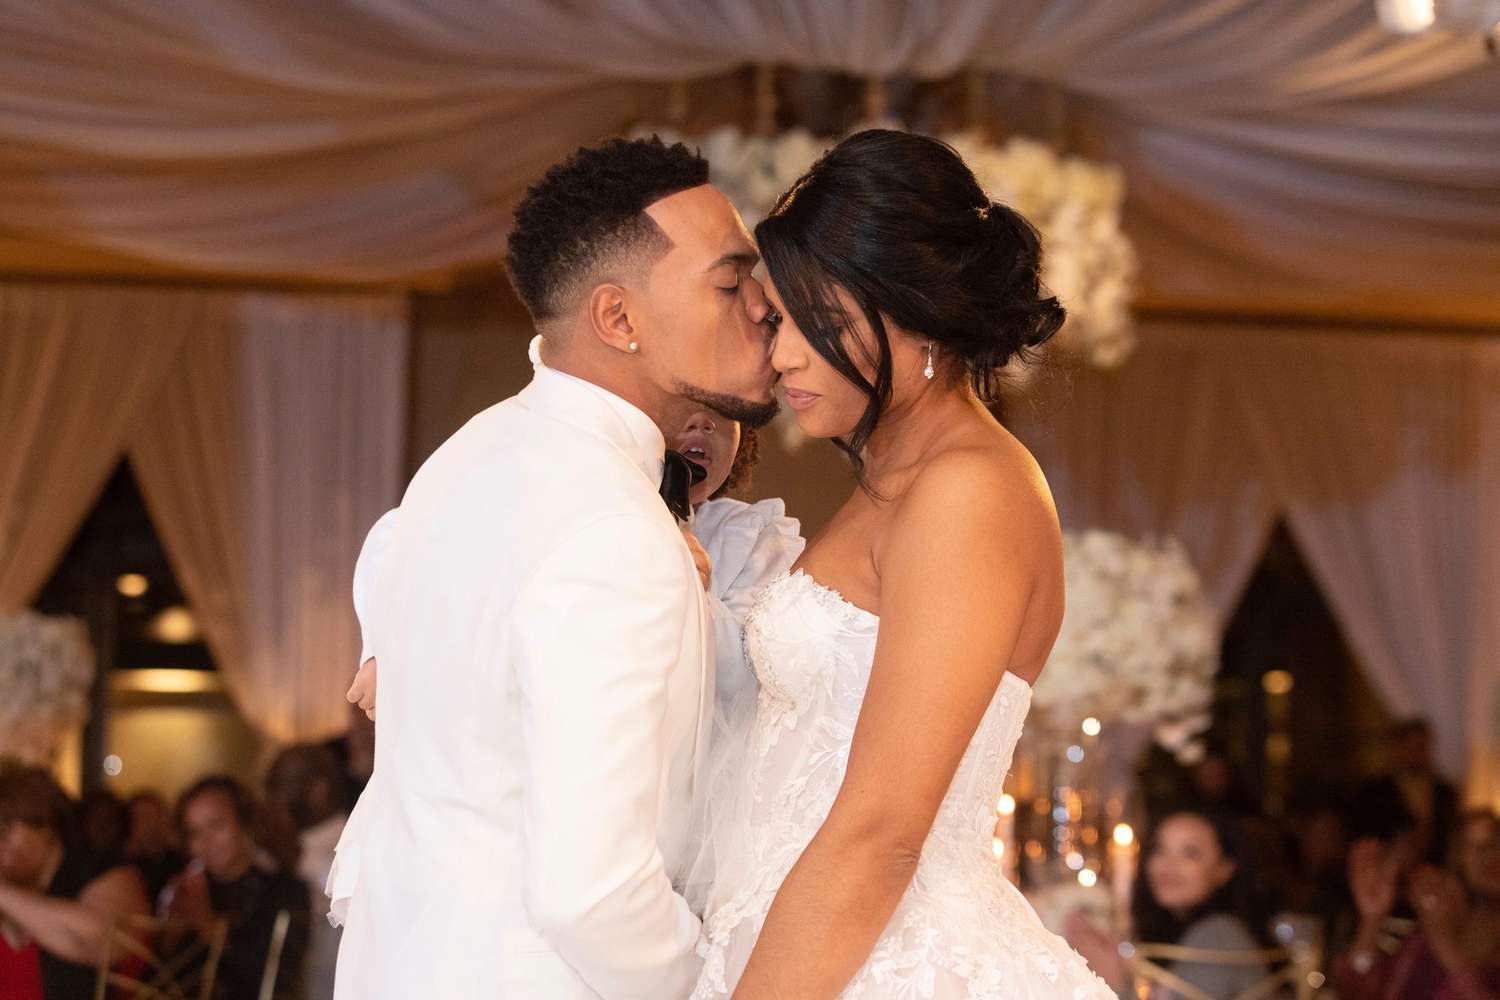 Chance the Rapper and Kirsten Corley Wedding